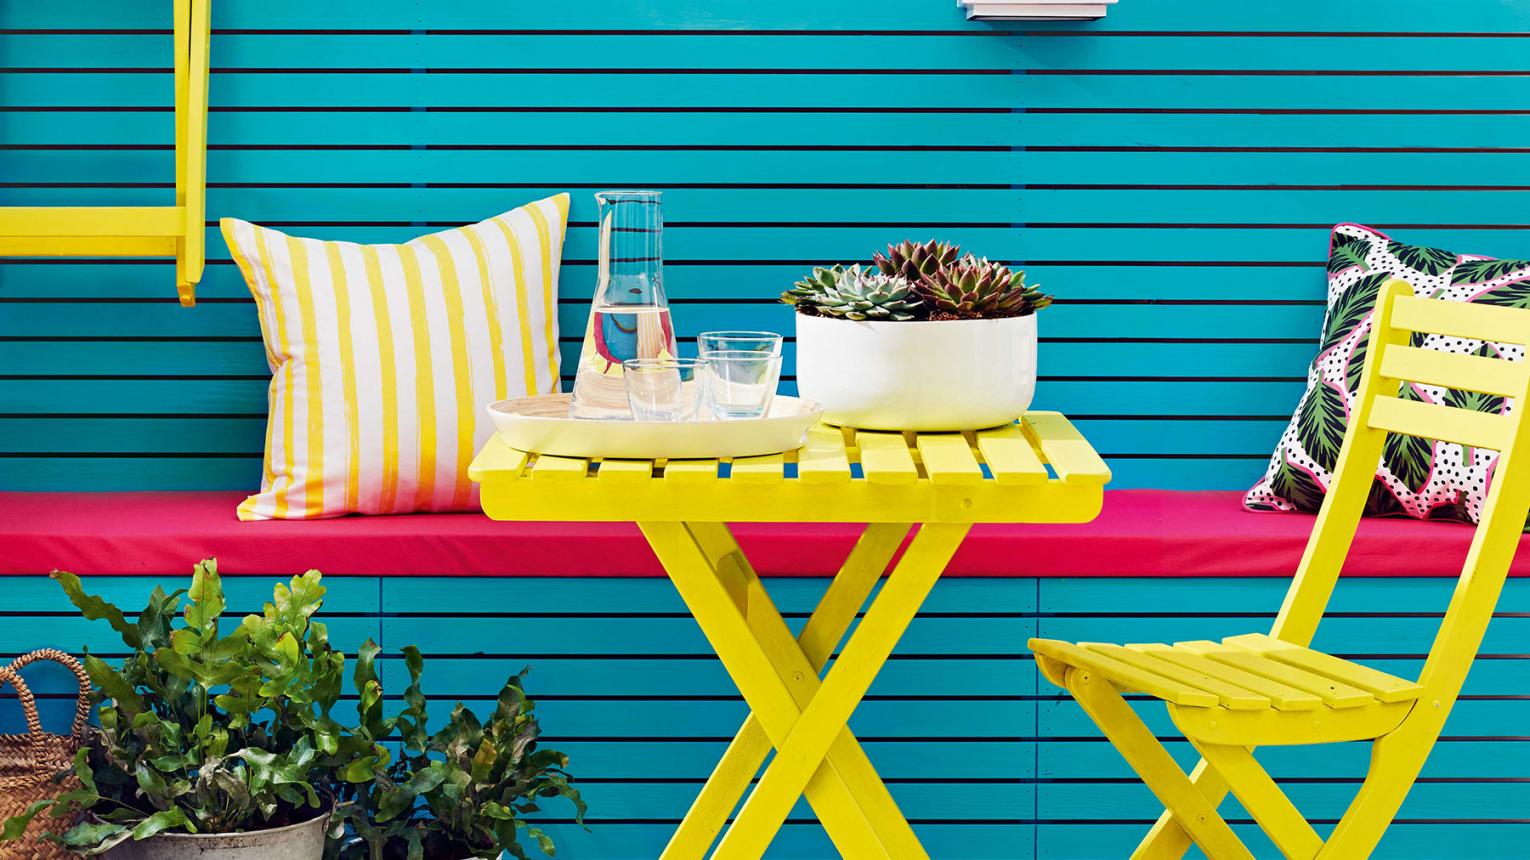 How To Paint Your Outdoor Furniture Dulux, How To Paint Outdoor Garden Furniture